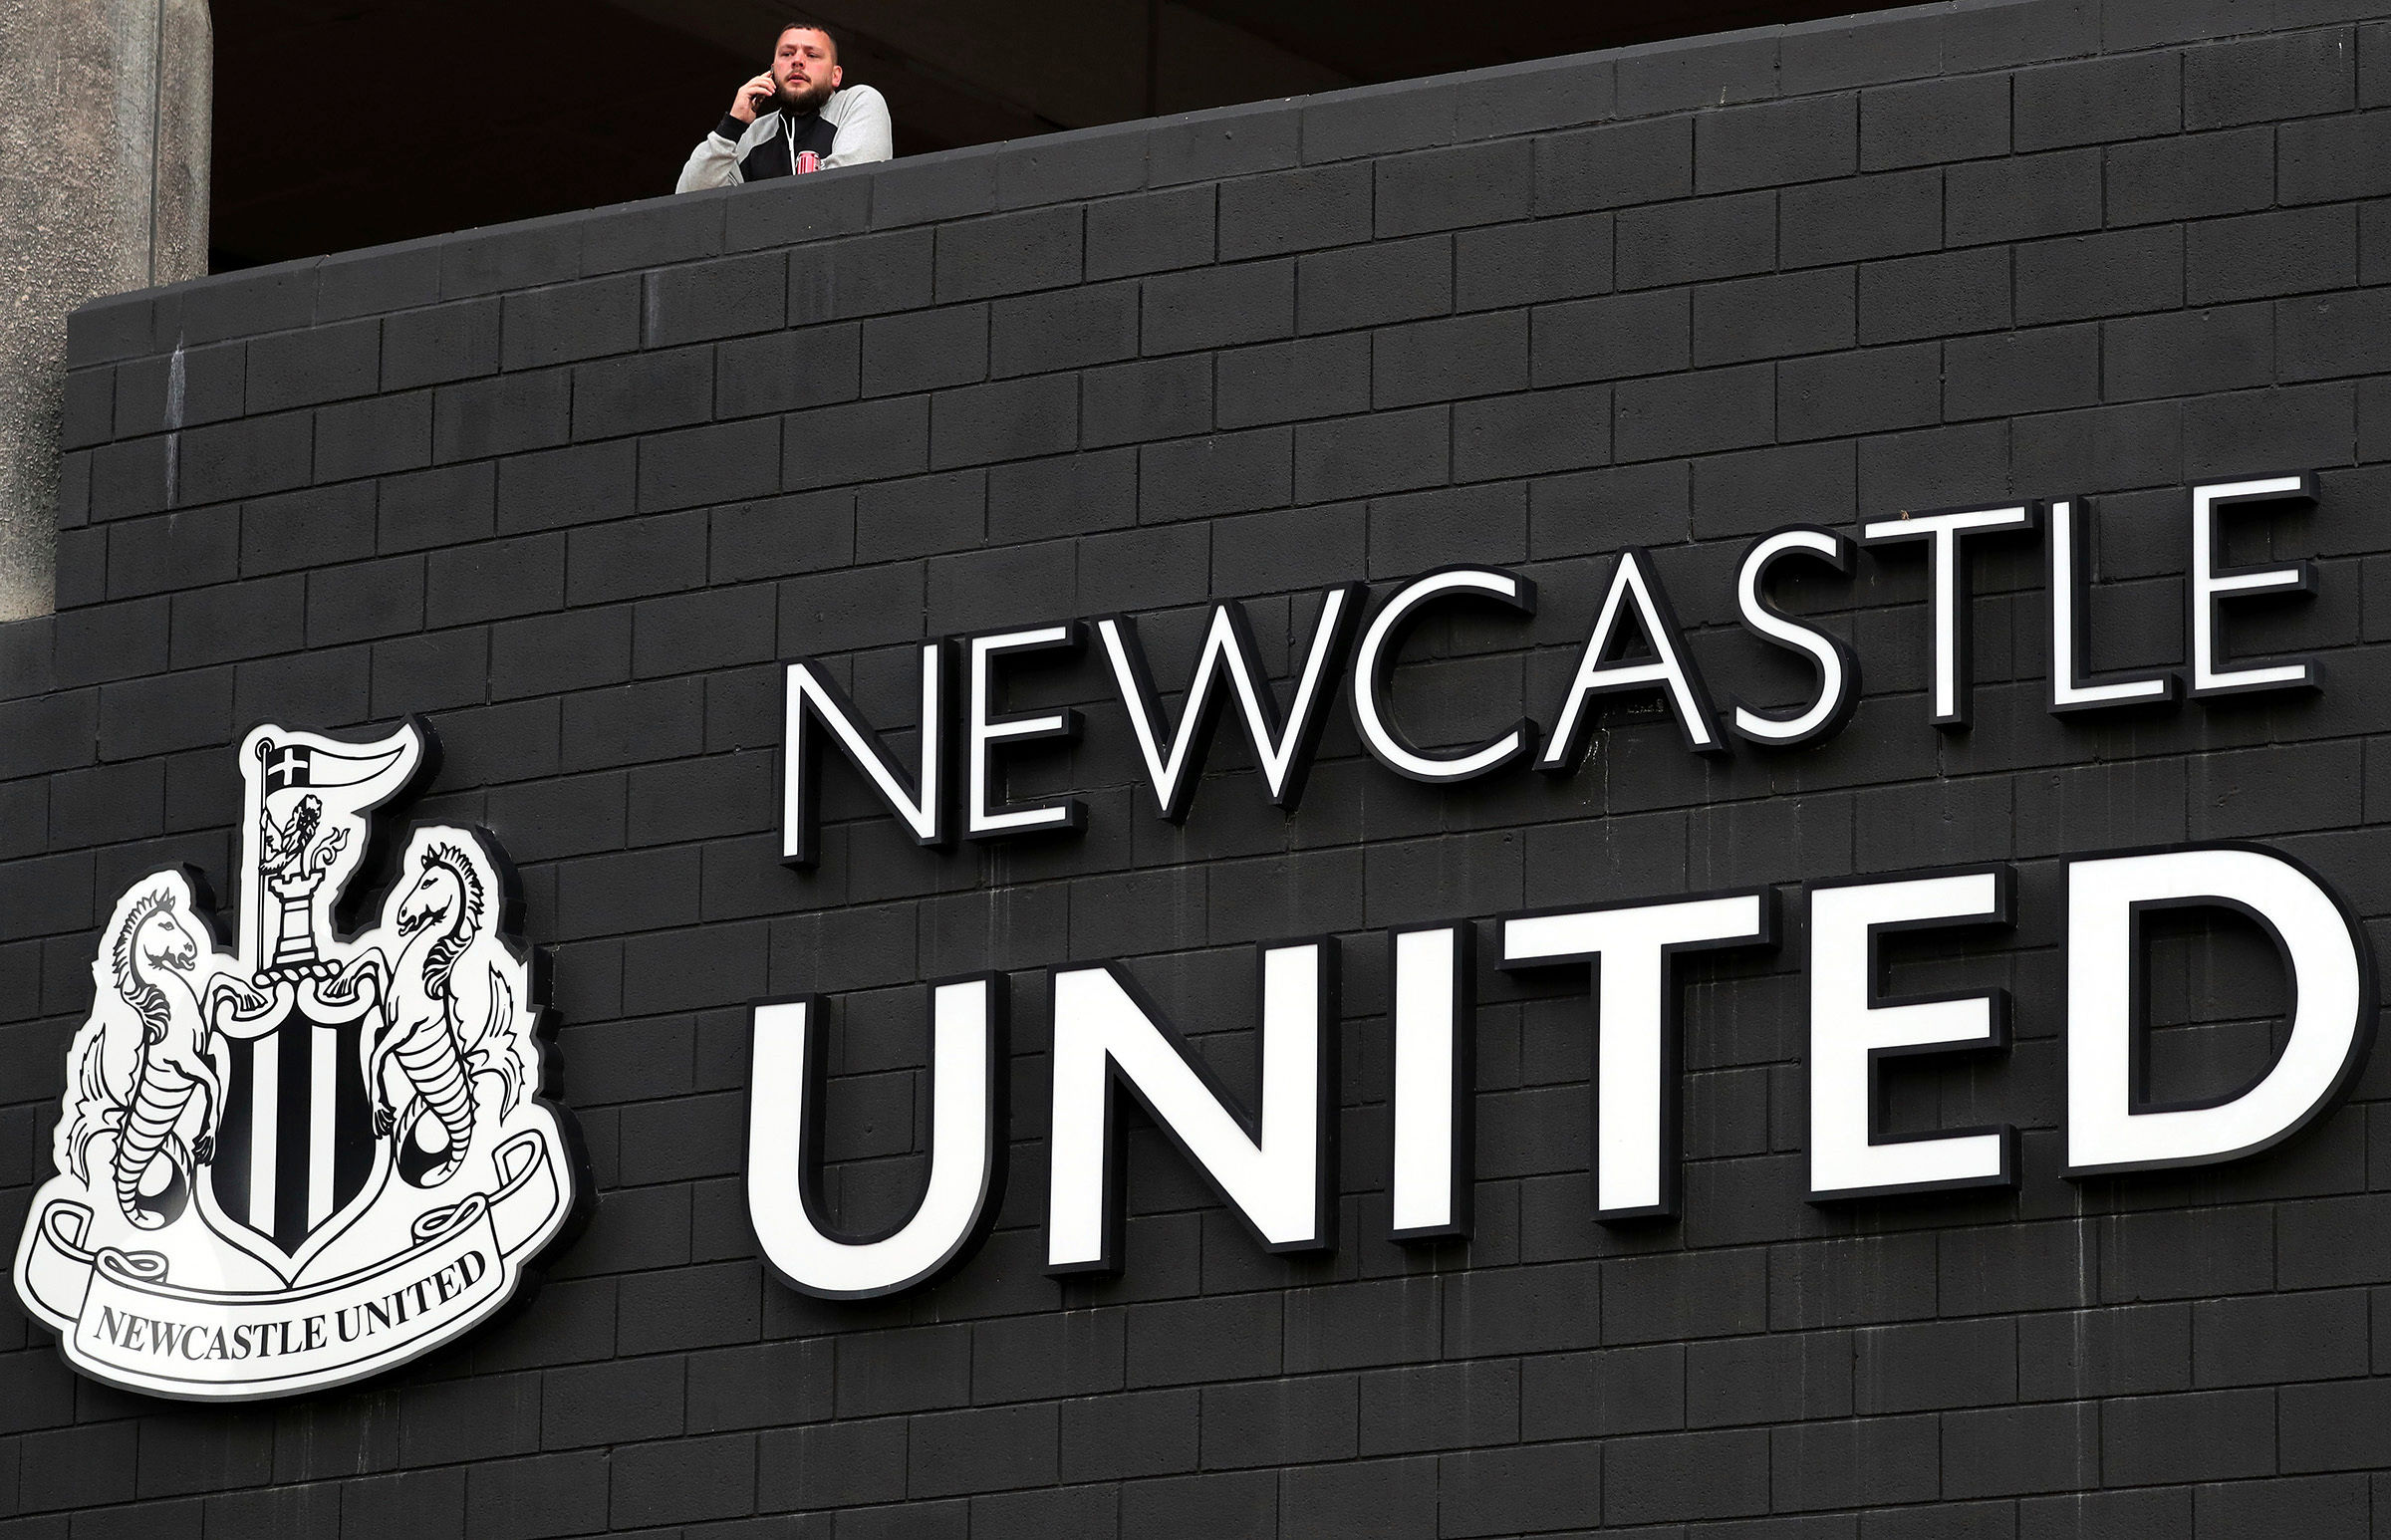 Newcastle United becomes one of the world’s richest football clubs